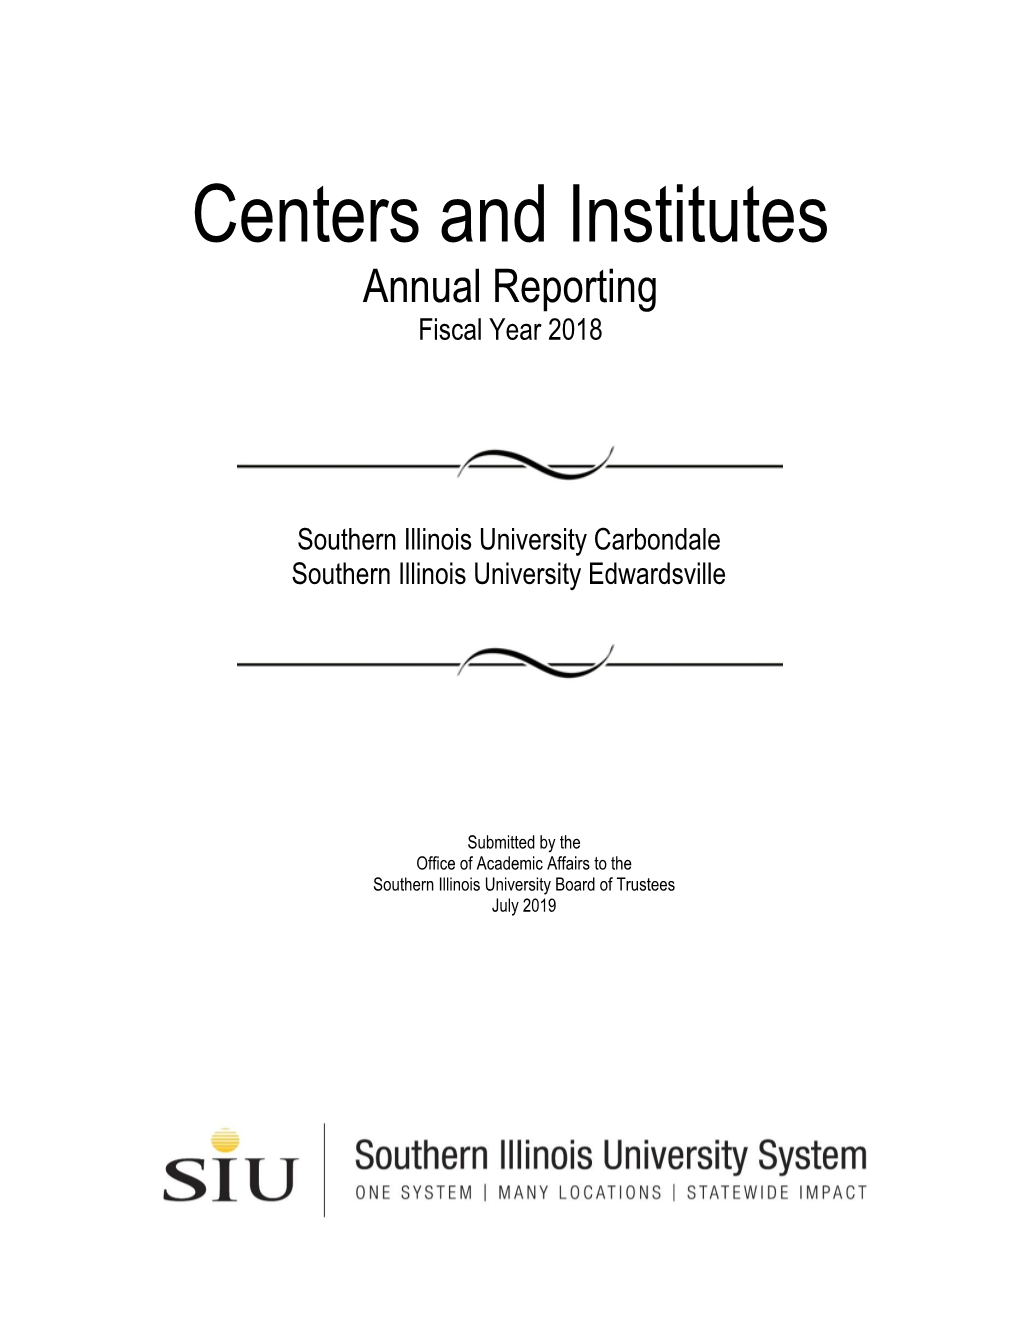 Centers and Institutes Annual Reporting Fiscal Year 2018